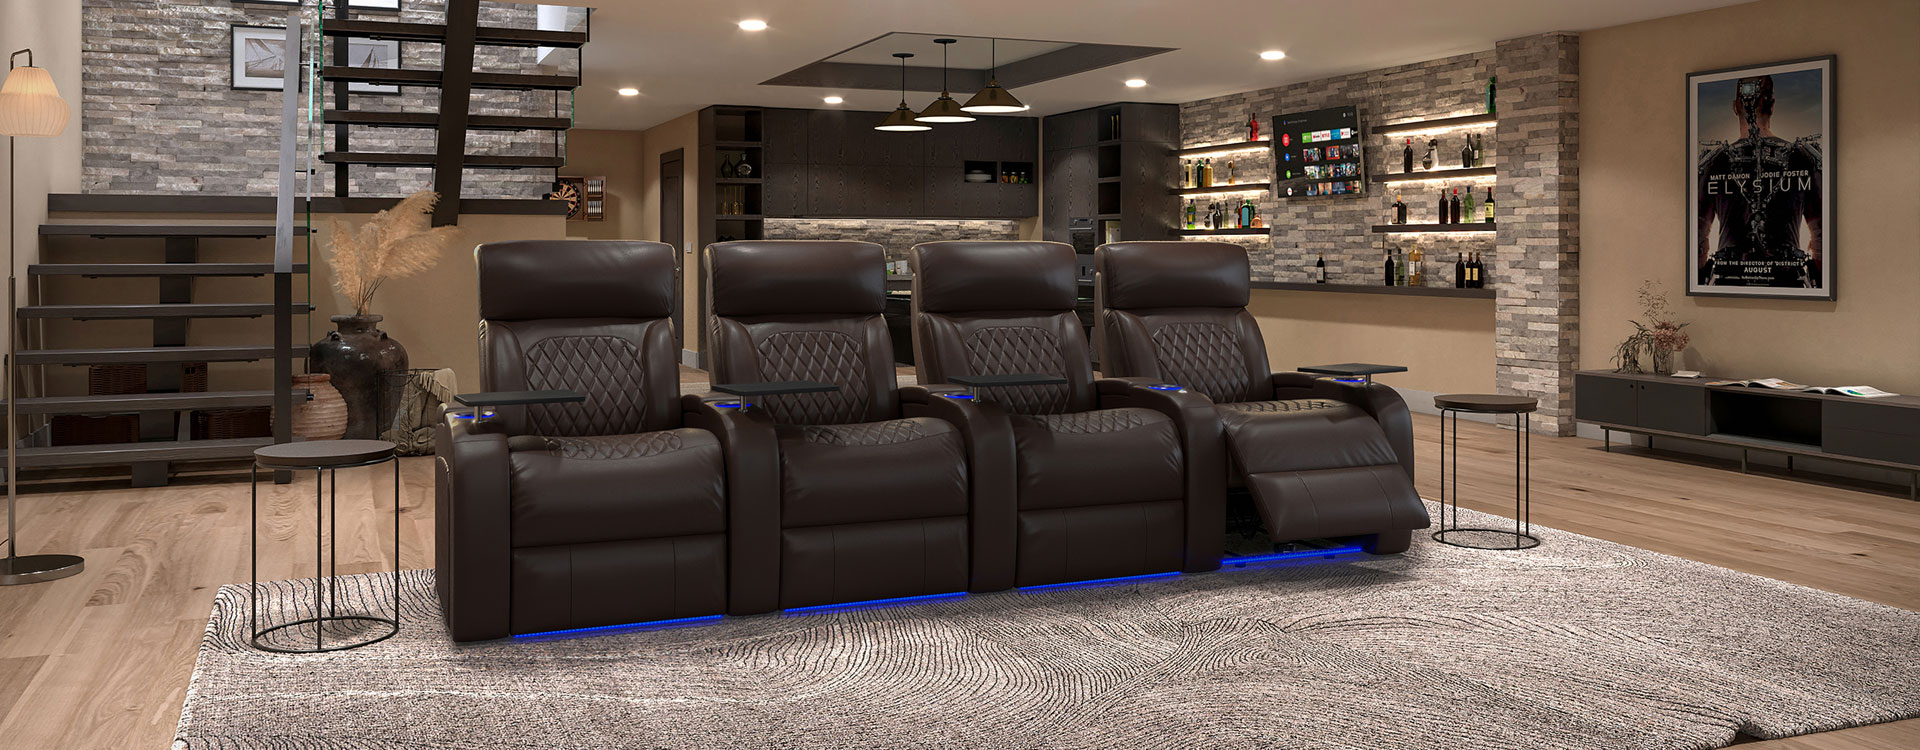 Home Theater Seating Luxurious, Leather Theater Recliners